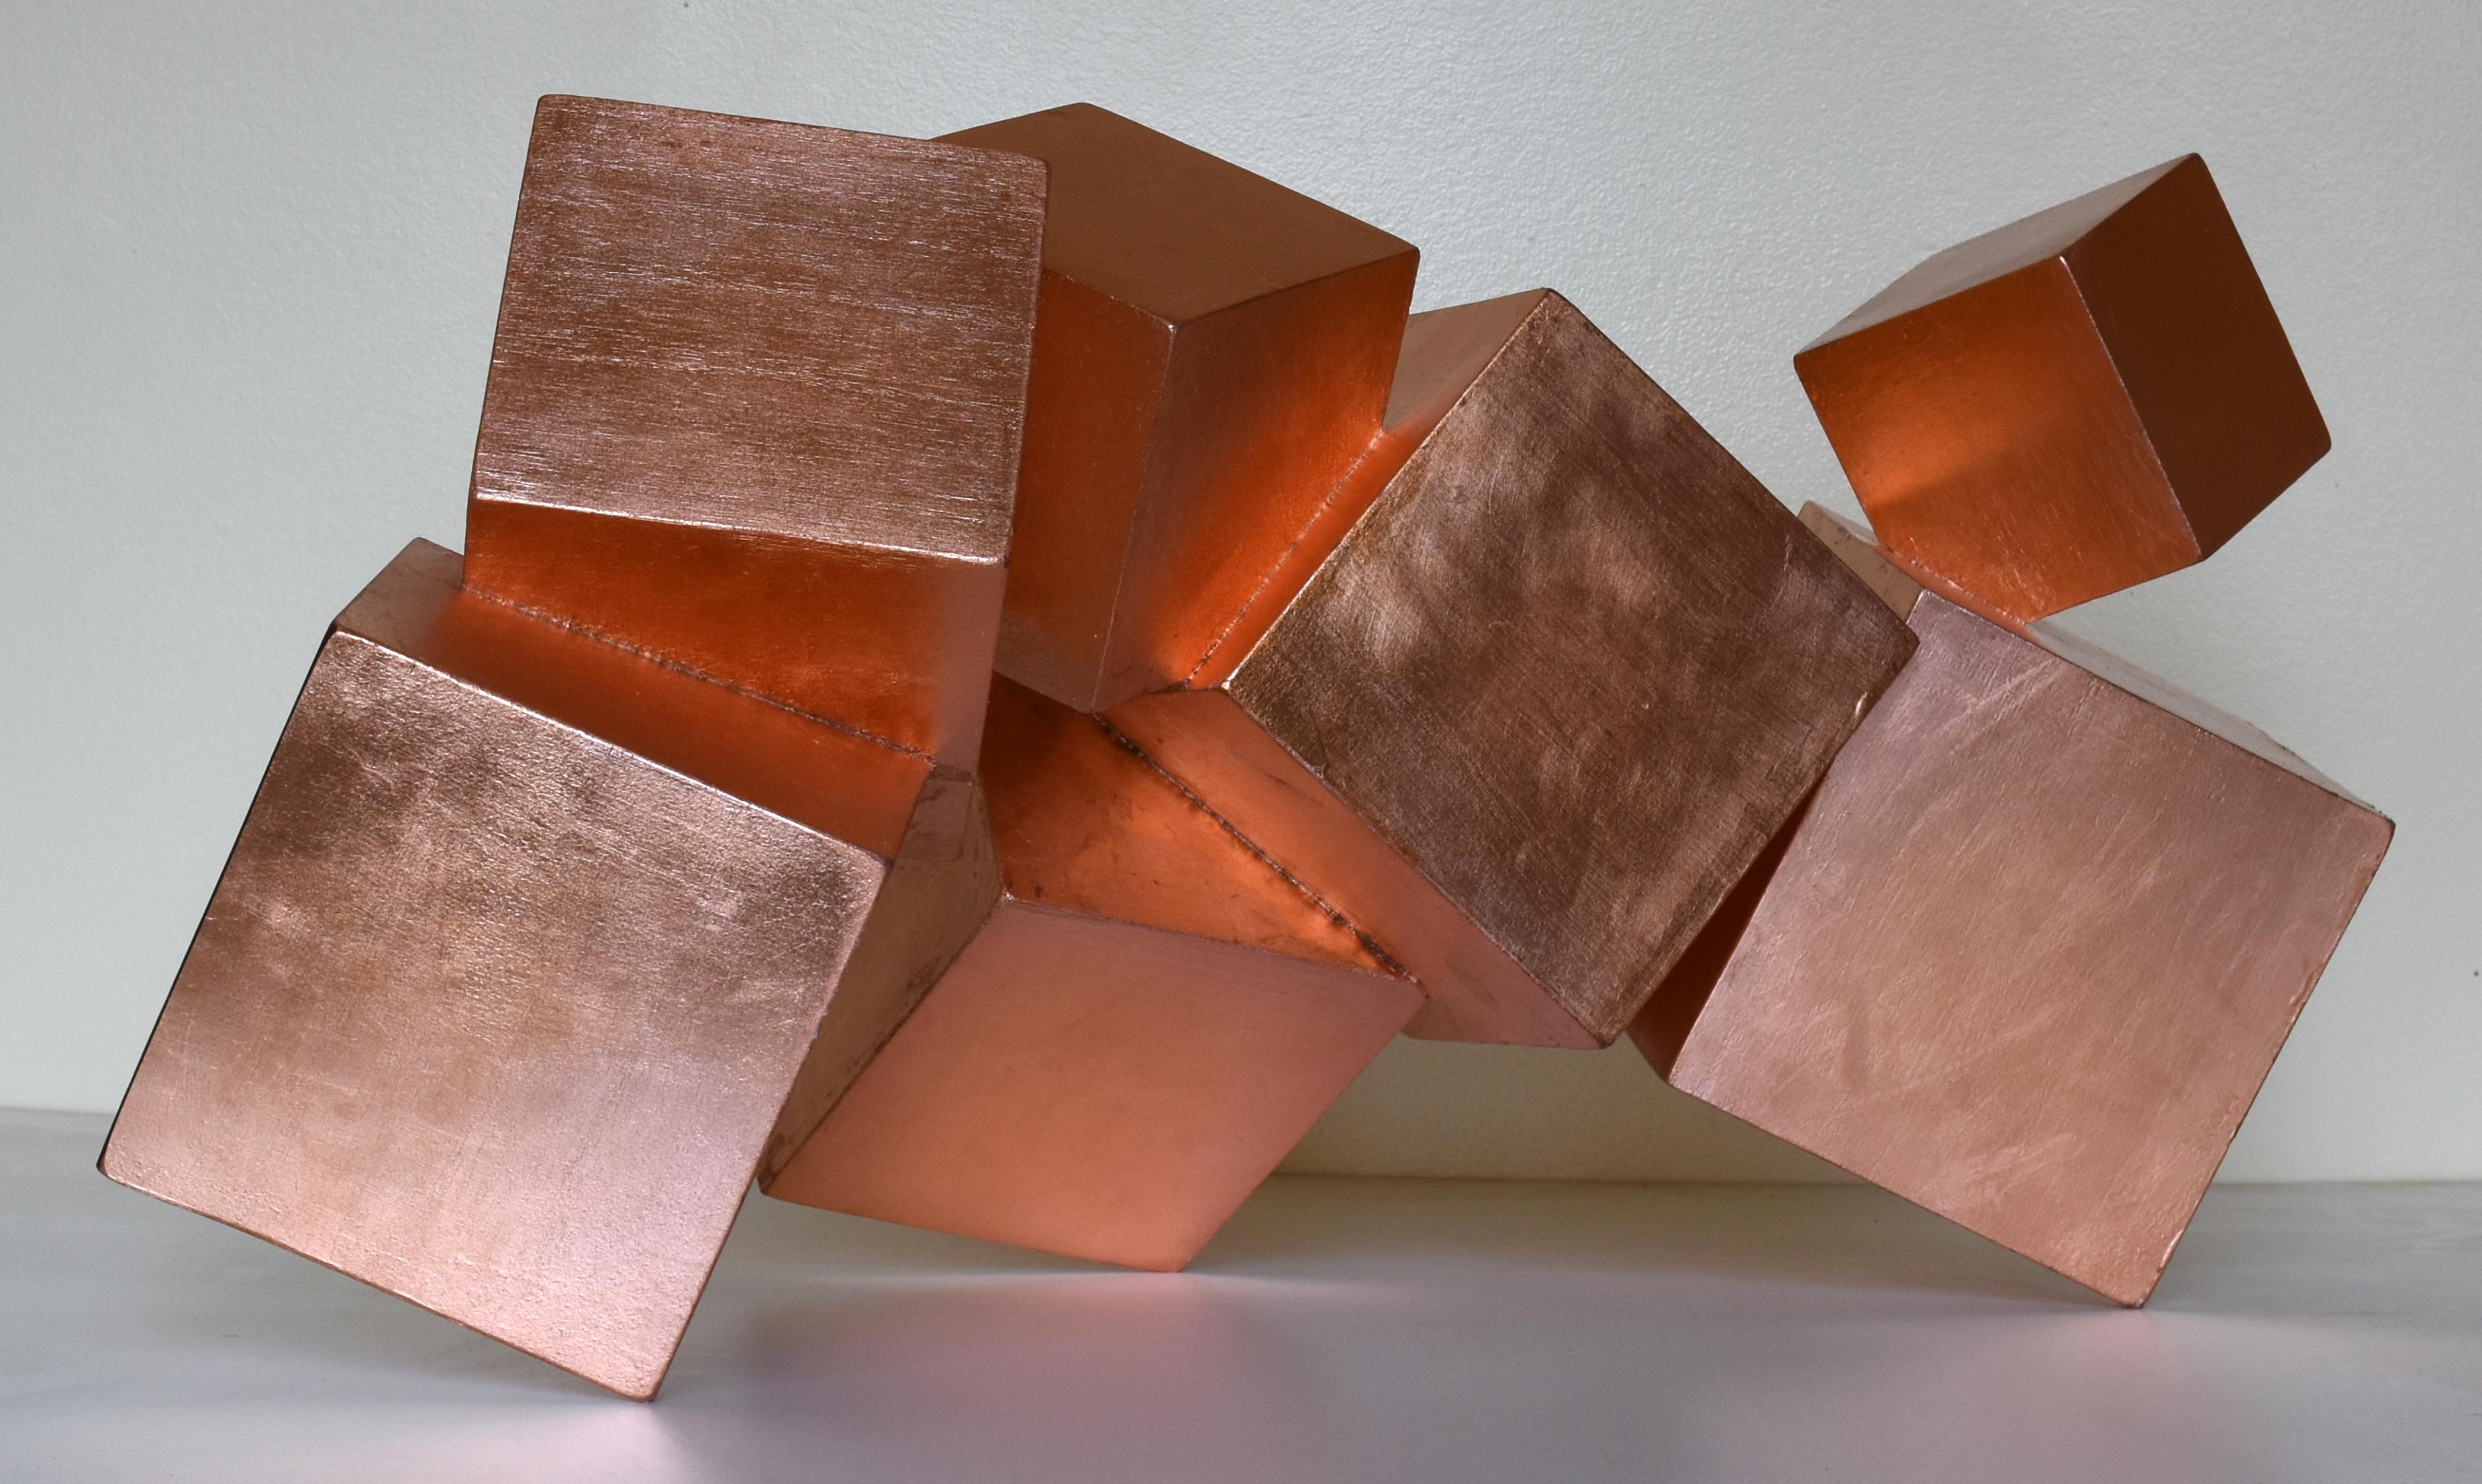 “COPPER AND MAHOGANY PYRITE”, COPPER LEAF ON PAULOWNIA WITH INSETS
IN MAHOGANY, 15H X 31W X 18D, 2019, FREE-STANDING SCULPTURE-ABOUT 5
POUNDS, COA INCLUDED, SHIPS IN A WOODEN CRATE.

This series by Chloe Hedden and Bill Hedden explores the growth